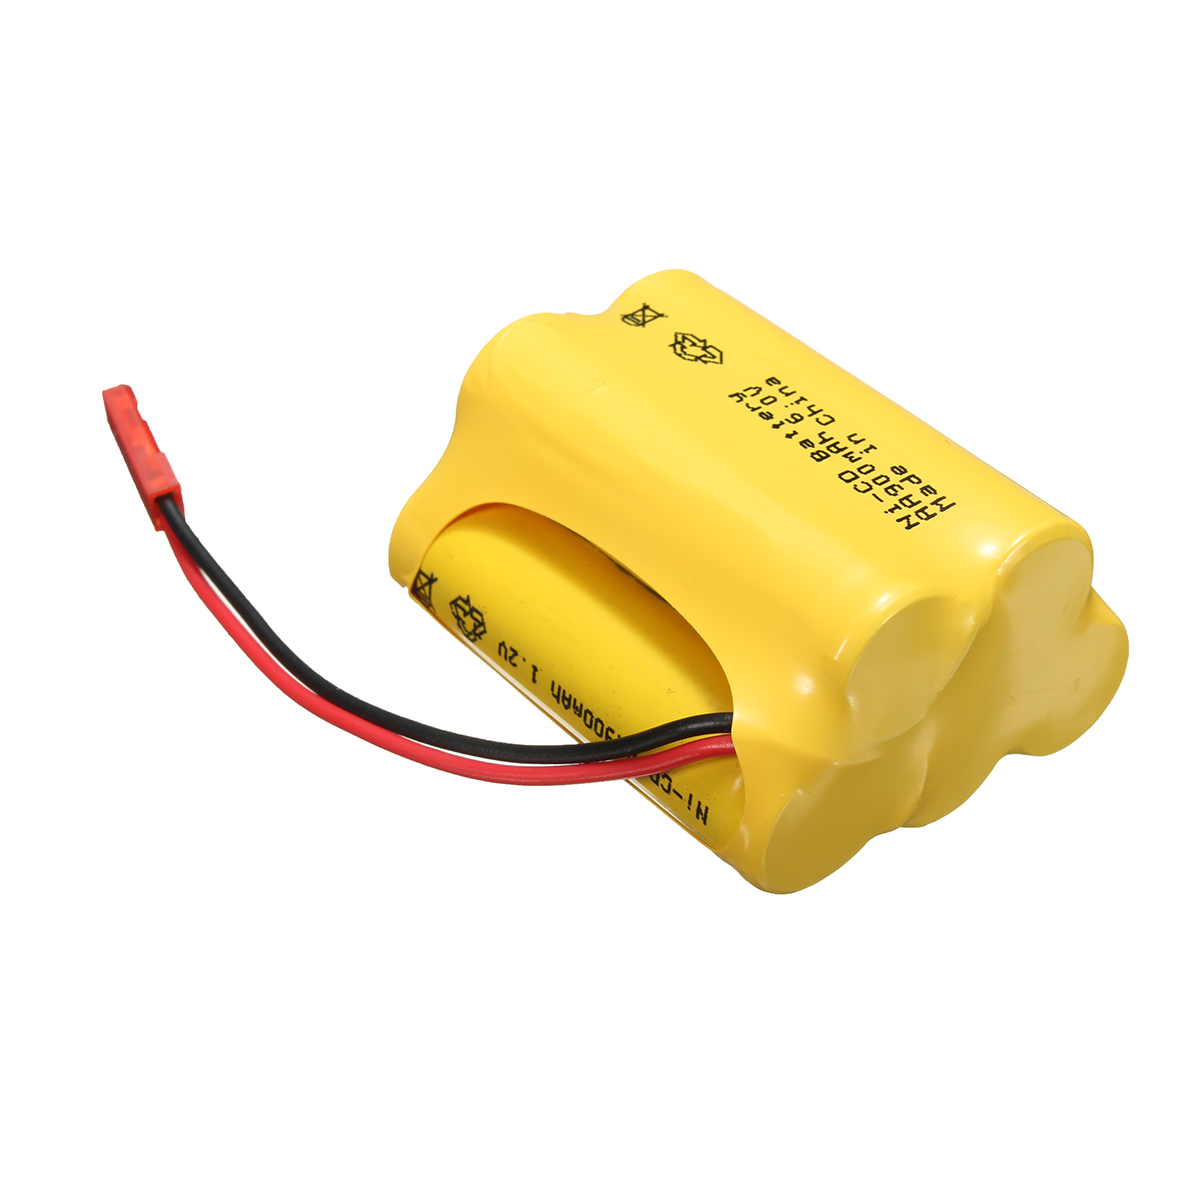 Ni-Cd-6V-900mAh-JST-SYP-Plug-Rechargeable-Battery-Solar-Light-For-Racing-Remote-Control-Car-1299833-3